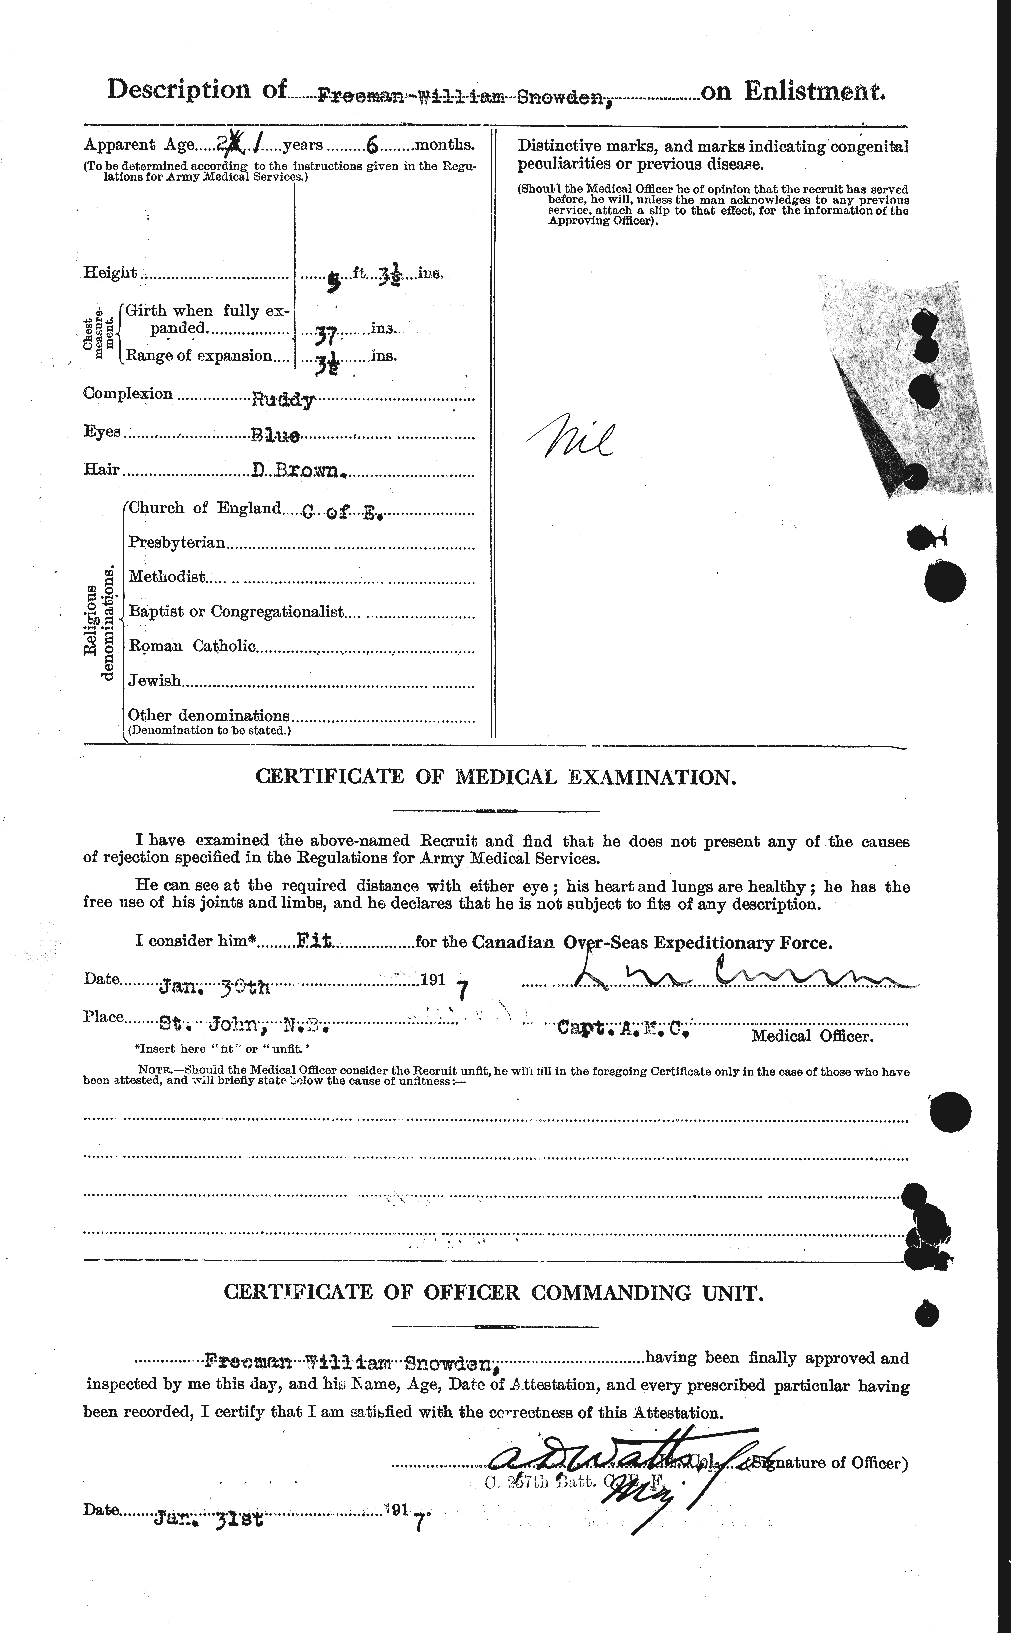 Personnel Records of the First World War - CEF 109491b